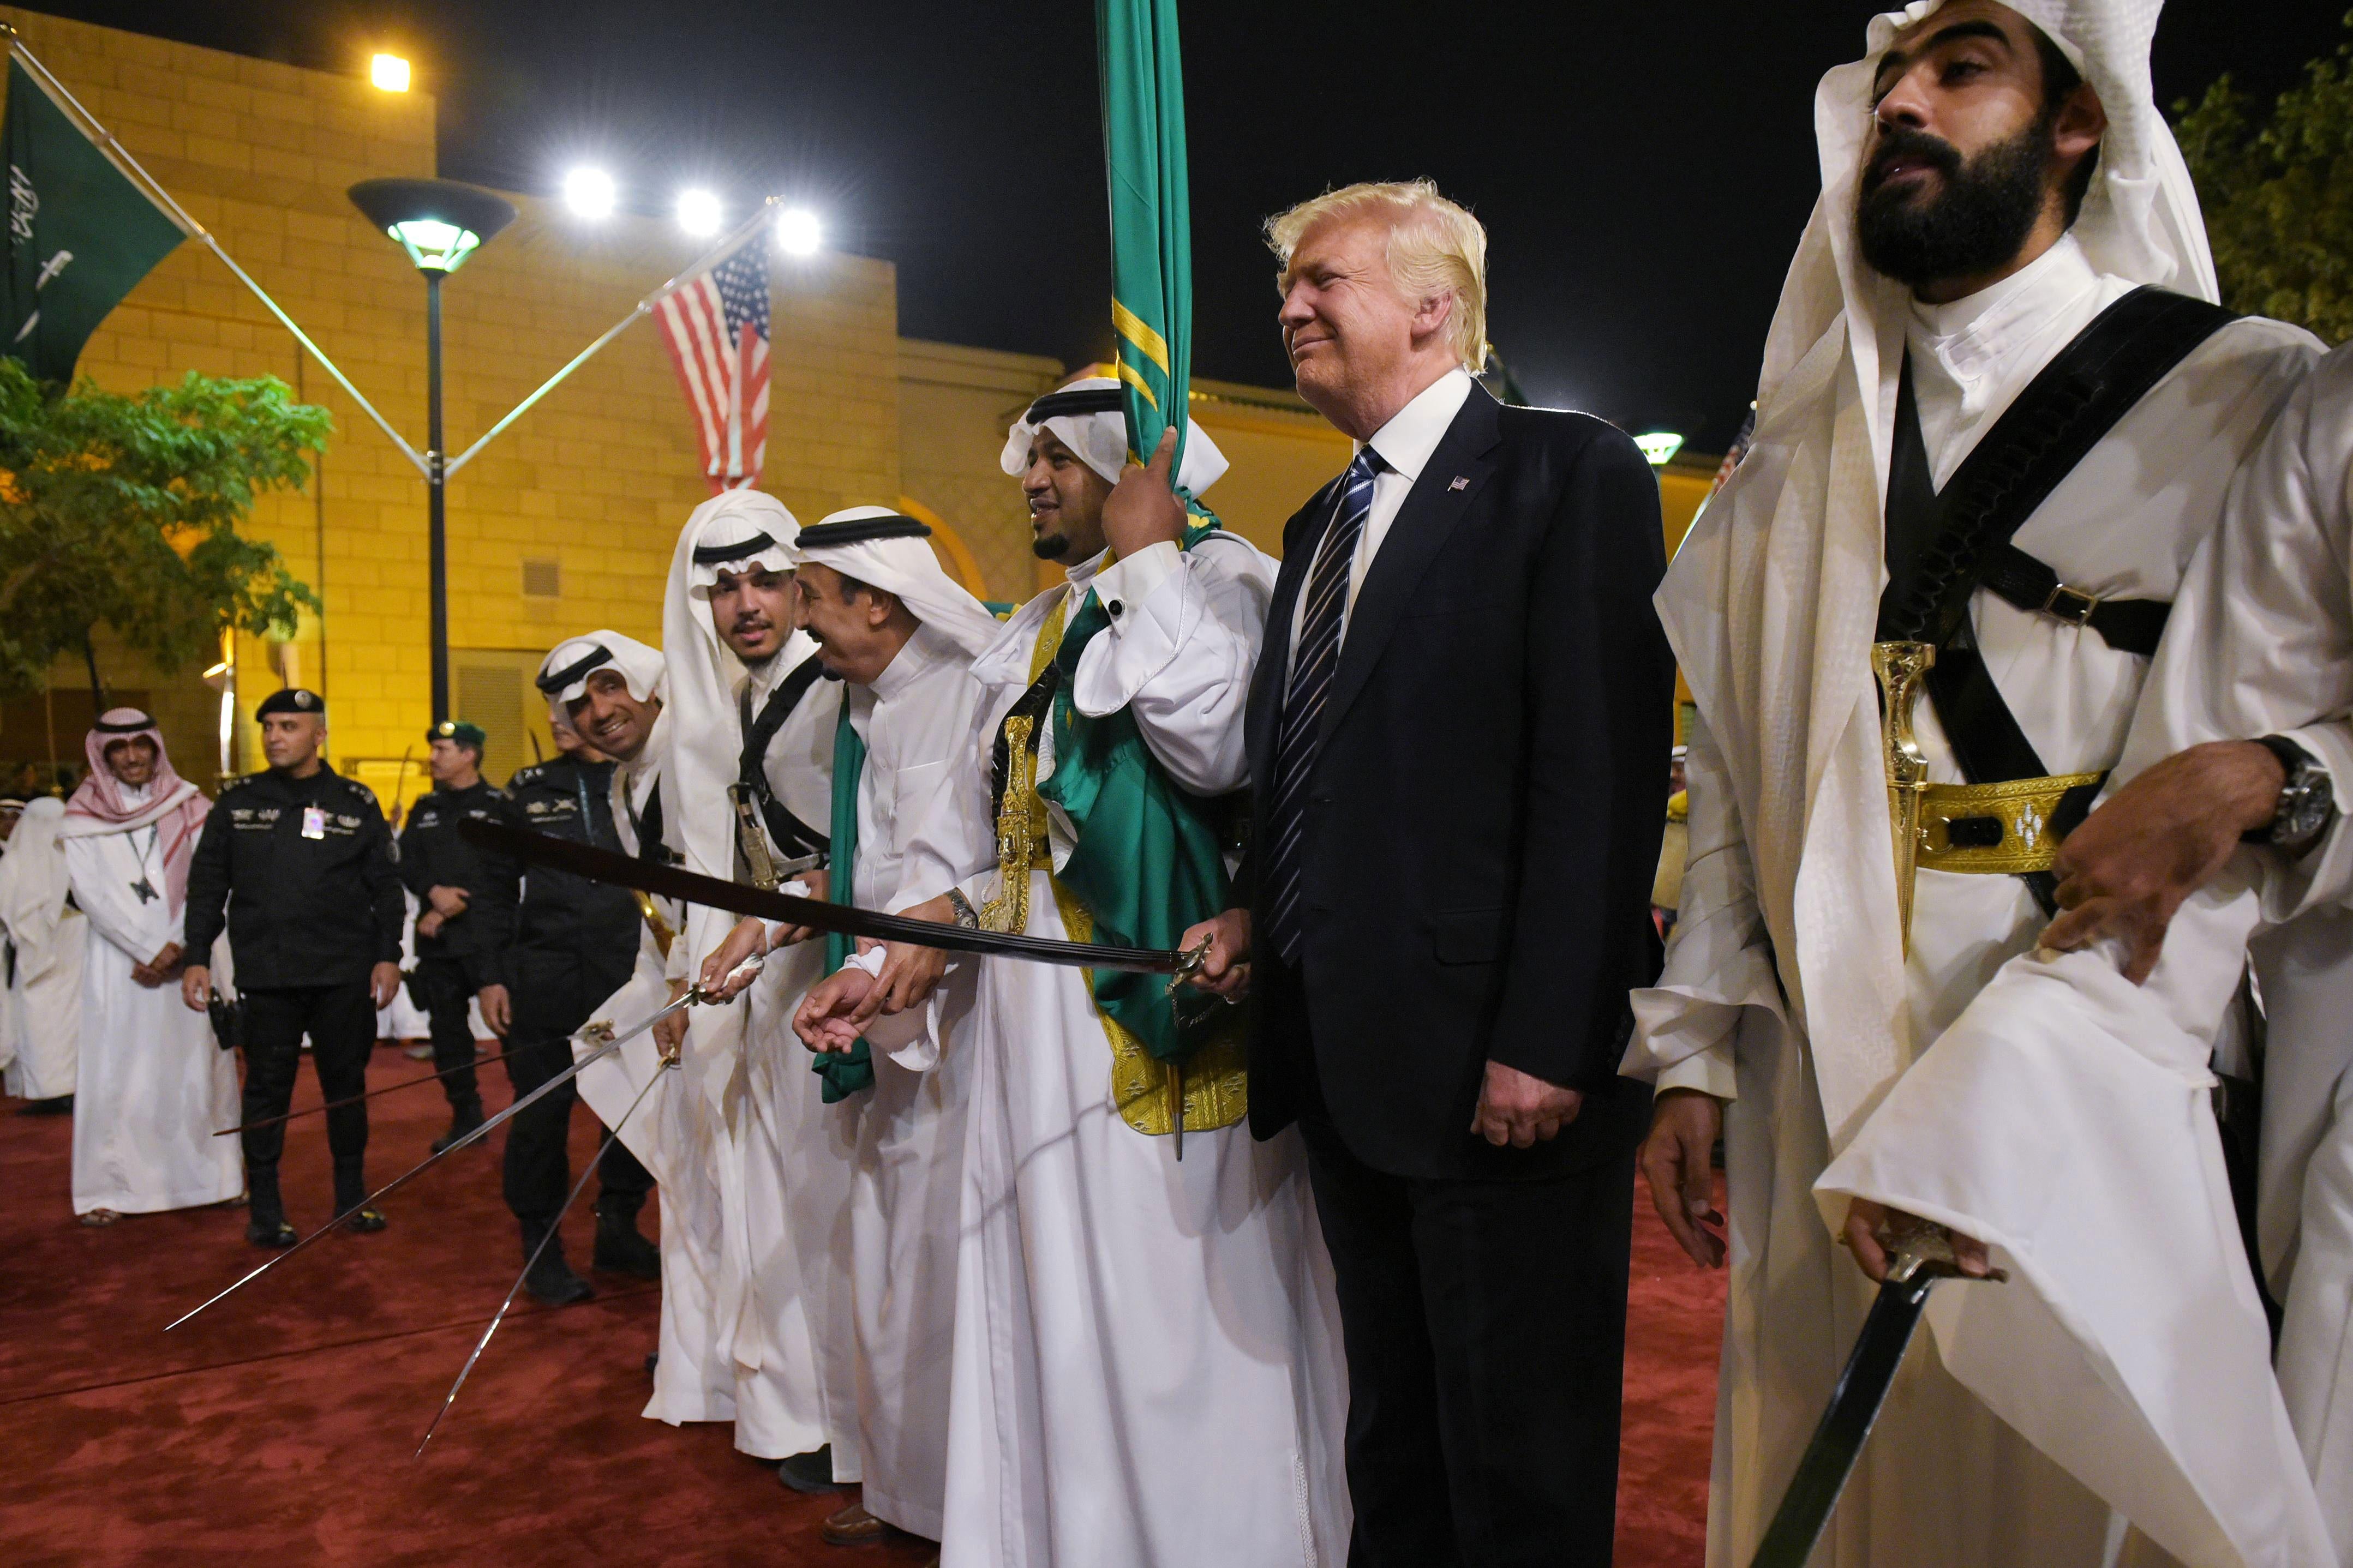 U.S. President Donald Trump joins dancers with swords at a welcome ceremony ahead of a banquet at the Murabba Palace in Riyadh on May 20, 2017. 